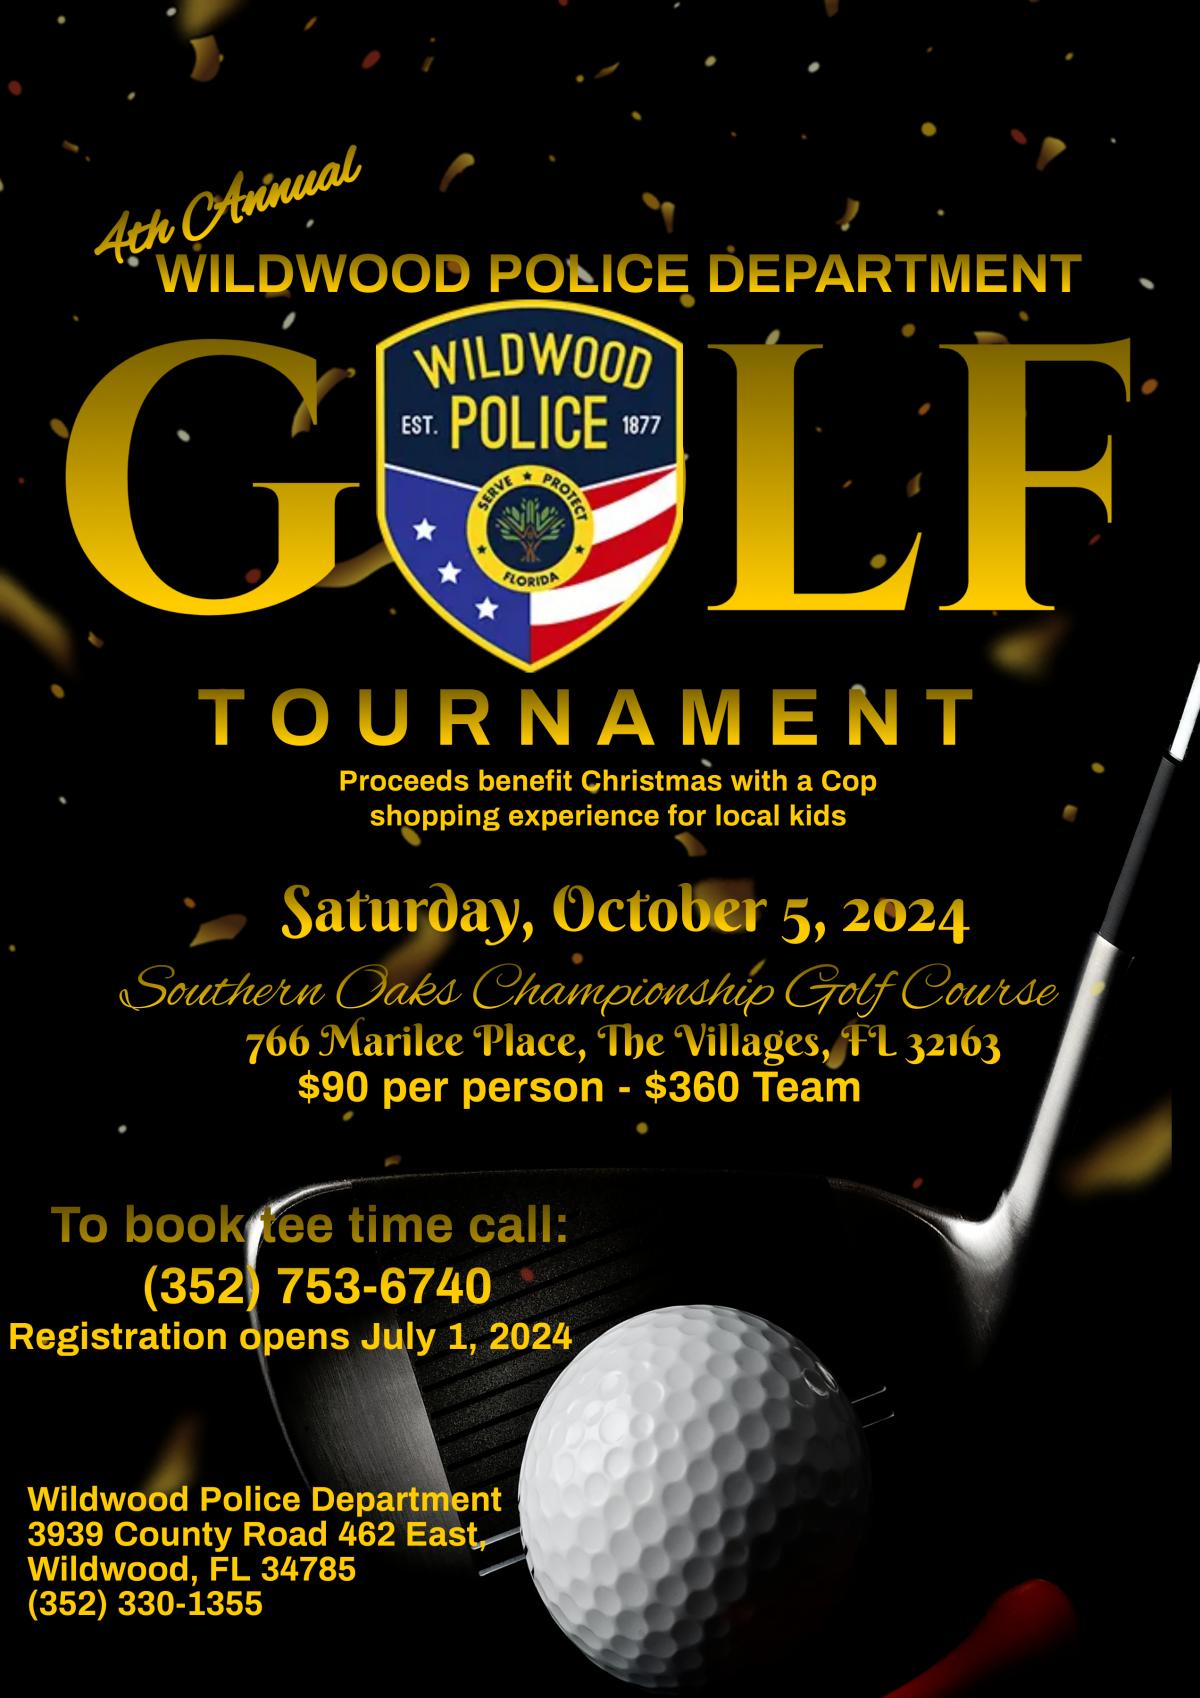 Wildwood Police Department "Golf Tournament" 10/5/24, Southern Oaks Championship Golf Course 766 Marliee Place, The Villages, Fl